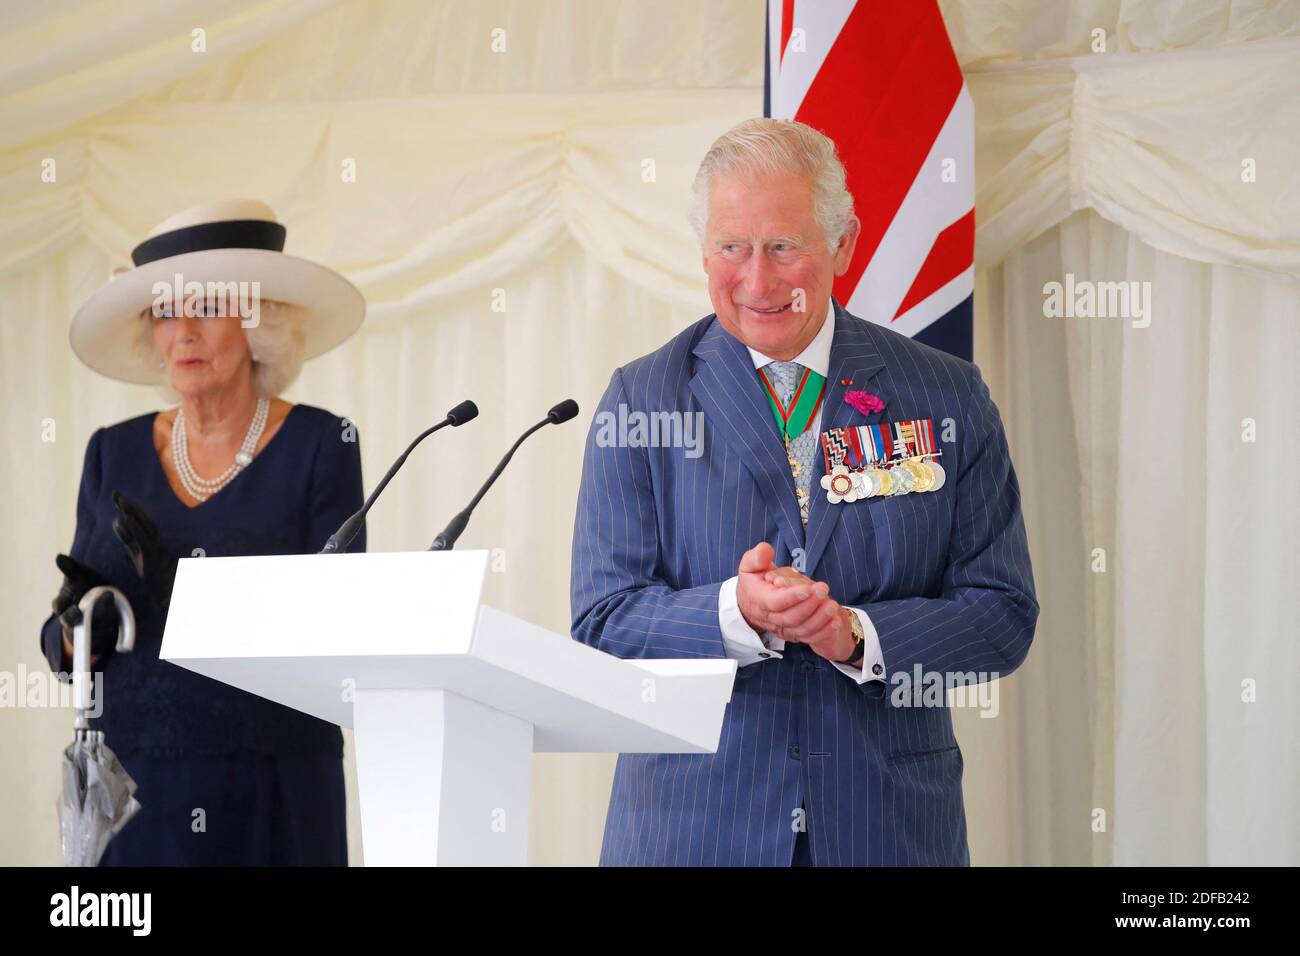 Britain's Camilla, Duchess of Cornwall (L) and Britain's Prince Charles, Prince of Wales (R) attend a ceremony to present the Legion d'Honneur – France's highest distinction – to London for services during WW2 at Carlton Gardens in central London on June 18, 2020 during a visit to mark the anniversary of former de Gaulle's appeal to French people to resist the Nazi occupation. - Macron visited London on June 18 to commemorate the 80th anniversary of former French president Charles de Gaulle's appeal to French people to resist the Nazi occupation during World War II. Photo by Tolga AKMEN/Pool/A Stock Photo